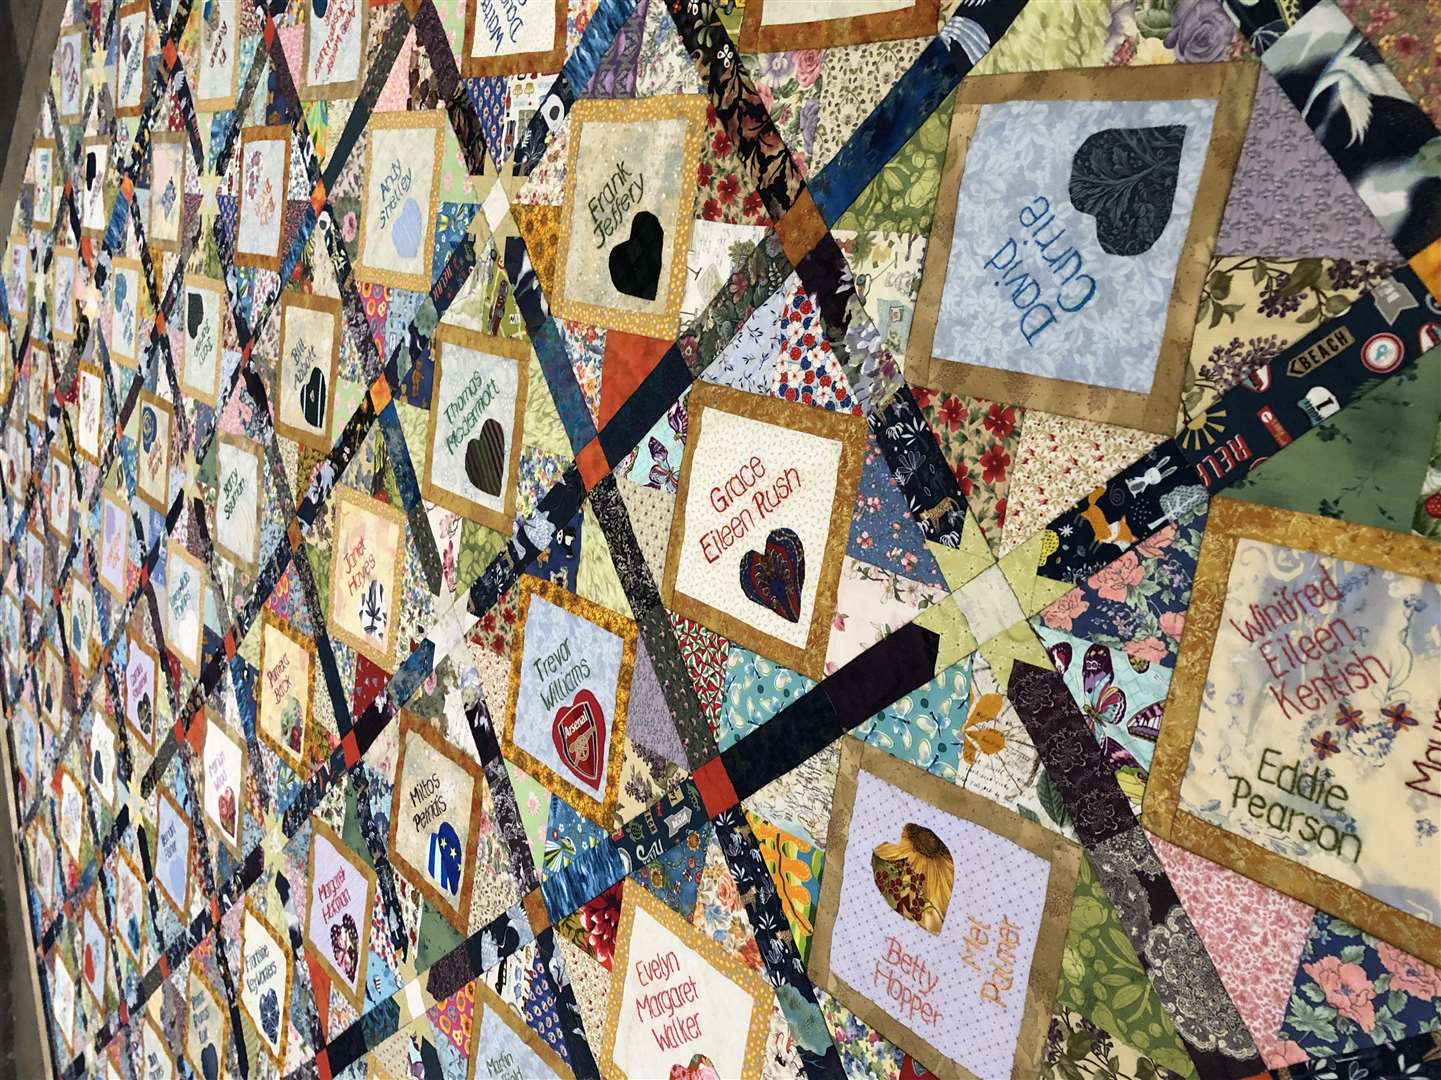 The Kent Corona Quilt is on display at Rochester Cathedral